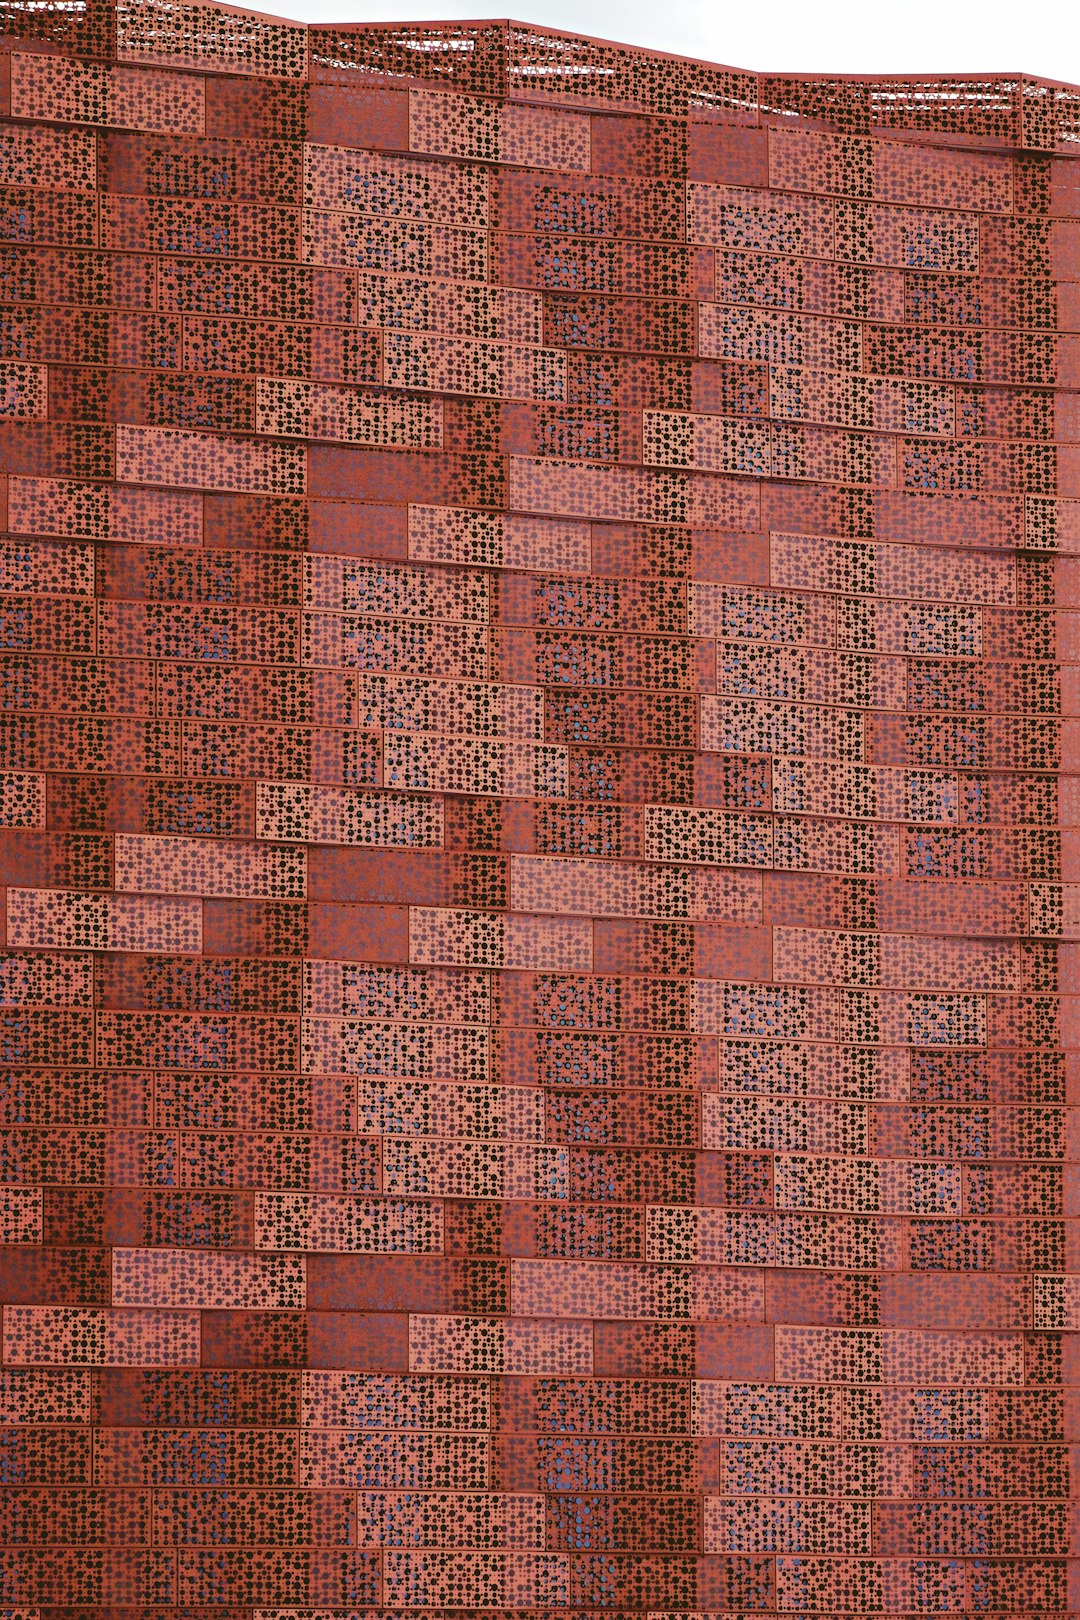 red and white checkered textile